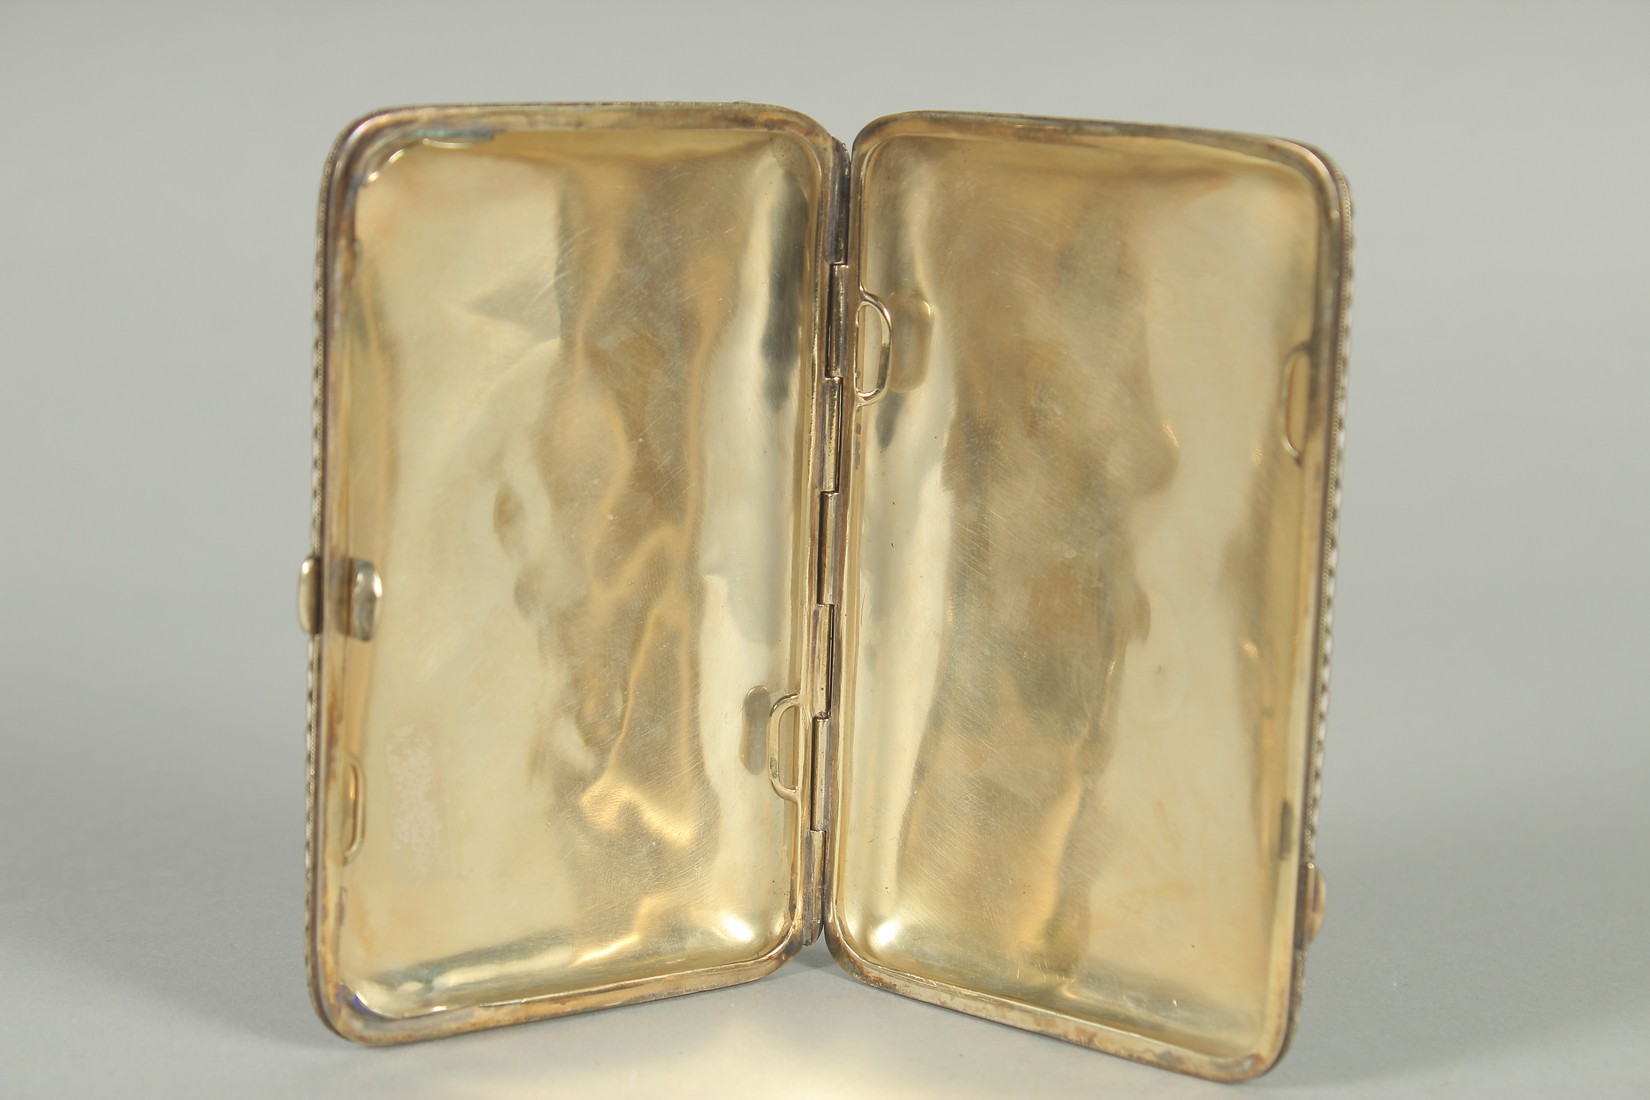 A RUSSIAN SILVER AND ENAMEL CIGARETTE CASE. 10cm x 6.5cm Weight: 119gms. - Image 3 of 4